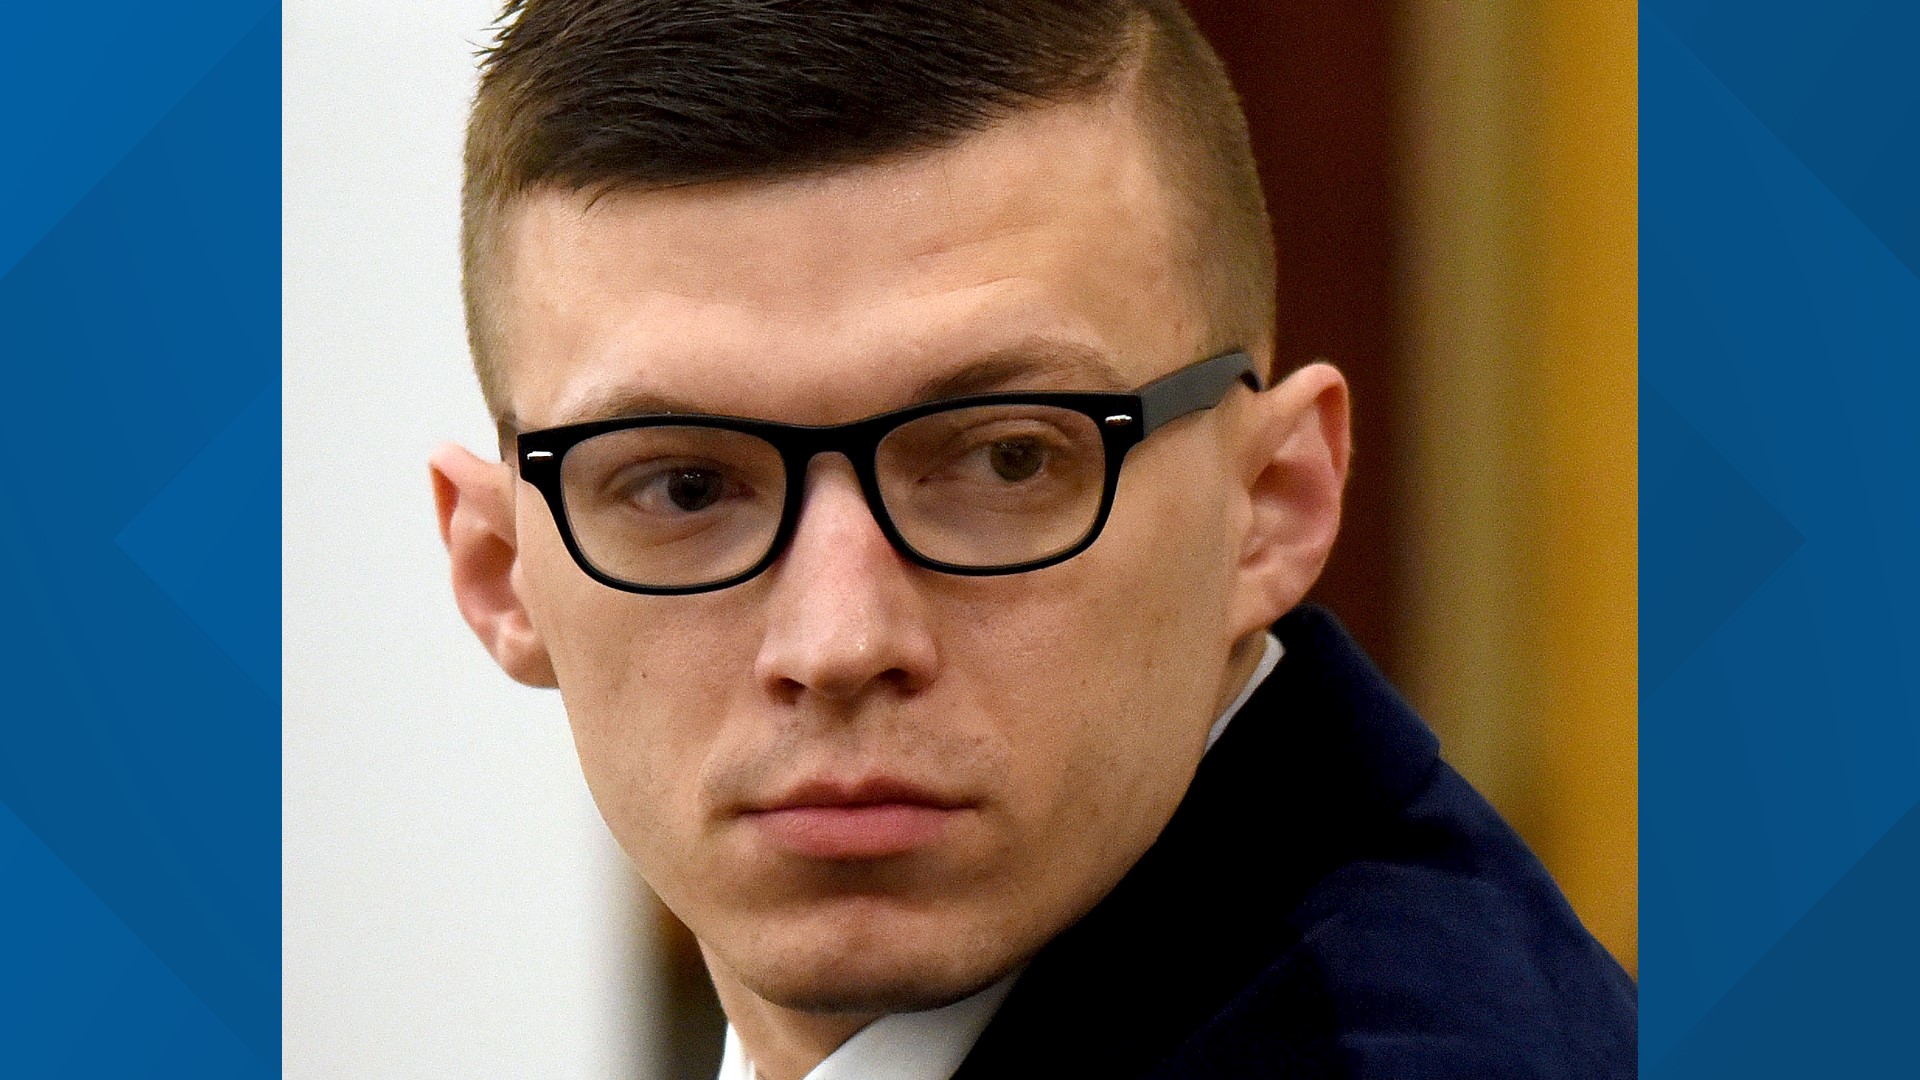 A jury in 2022 found Volodymyr Zhukovskyy not guilty of multiple manslaughter and negligent homicide counts stemming from a crash that killed seven motorcyclists.